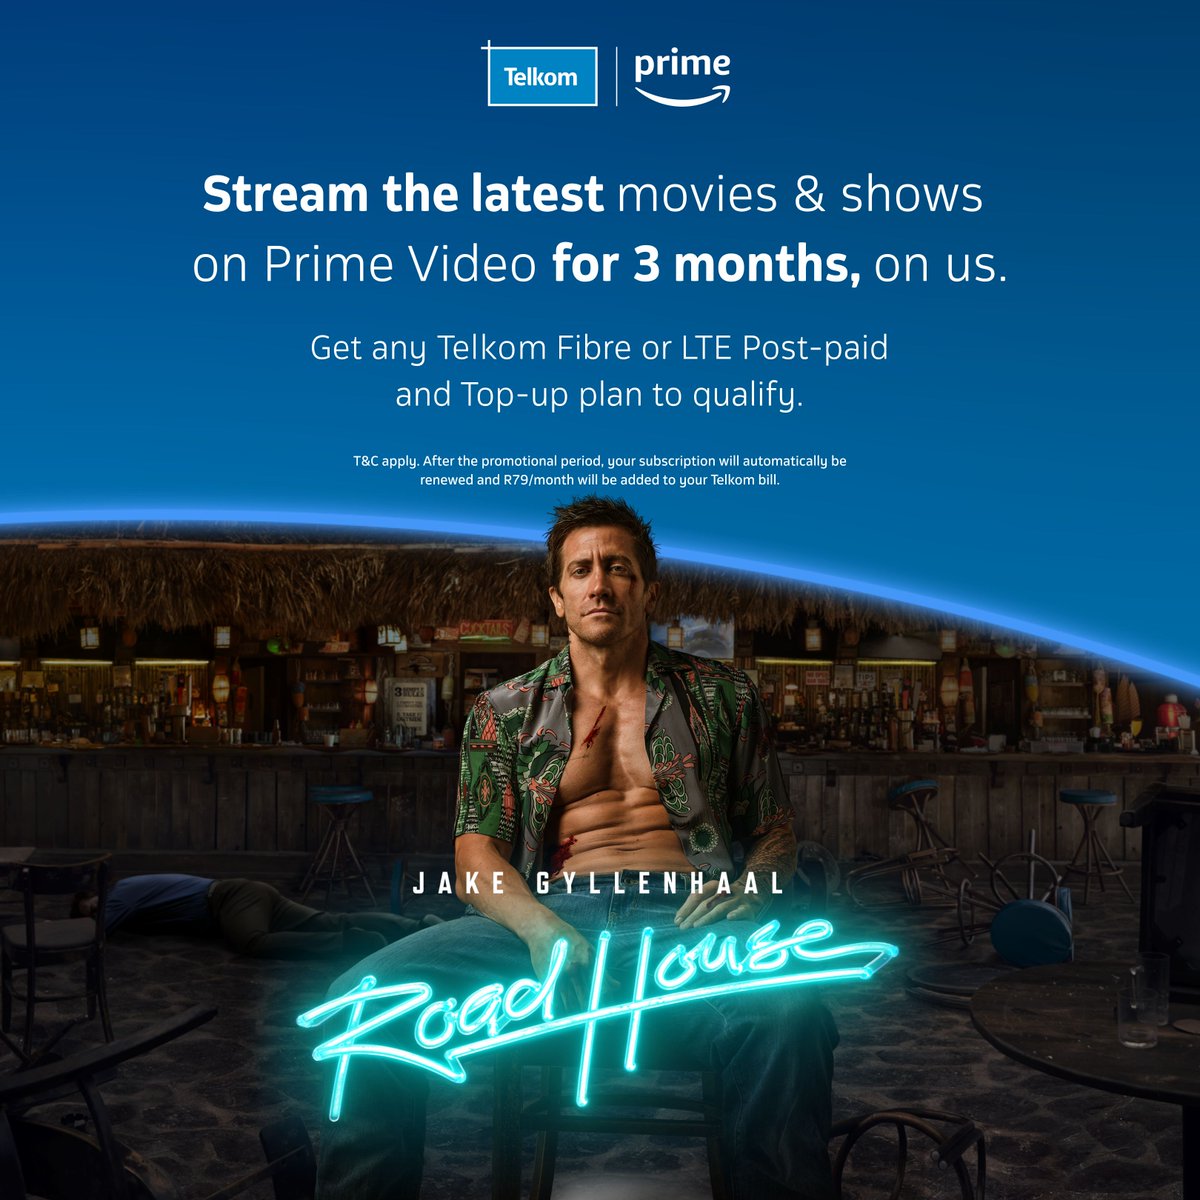 Get ready to be swept off your feet by 'Road House'! This action-packed blockbuster promises thrills 👀! Sign up for our Telkom Fibre or LTE Post-paid & Top-up plan today and you will get 3 months of Prime Video on us! #TelkomxPrimeVideo Learn more: bit.ly/3UBILq2